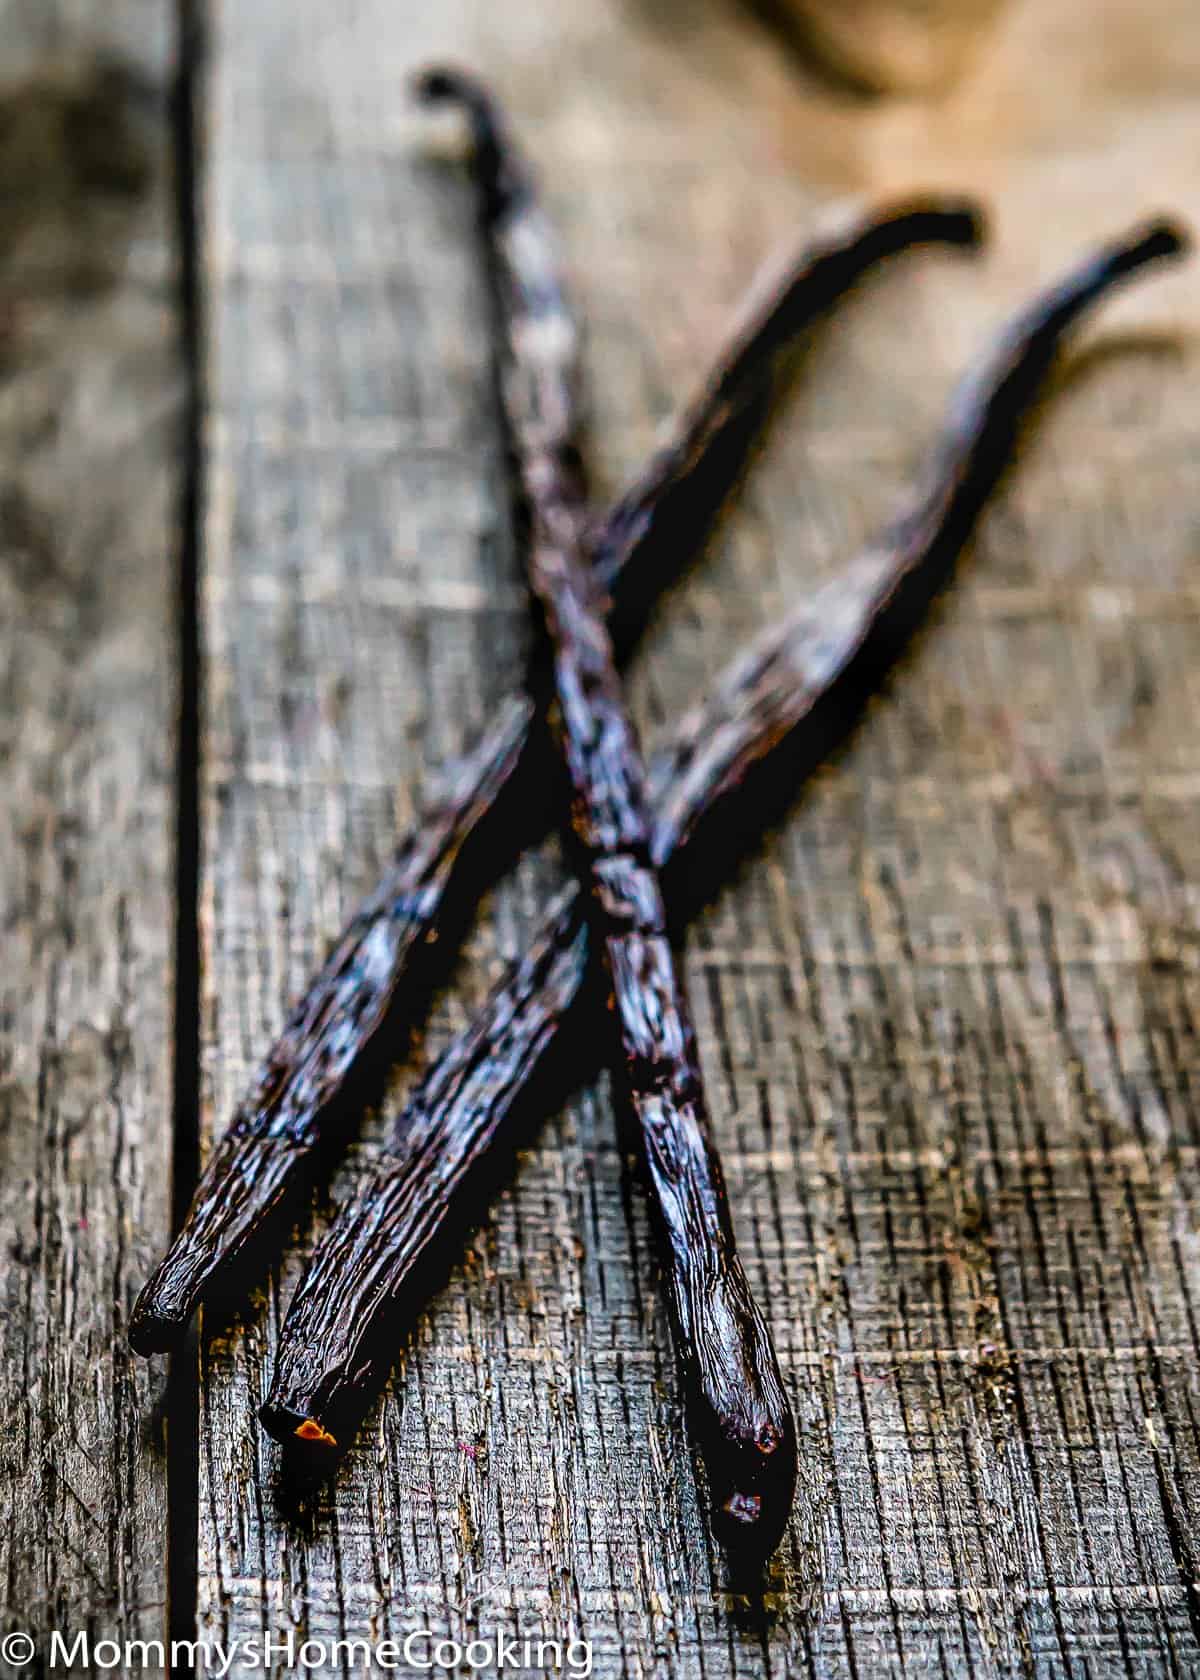 vanilla beans over a wooden surface